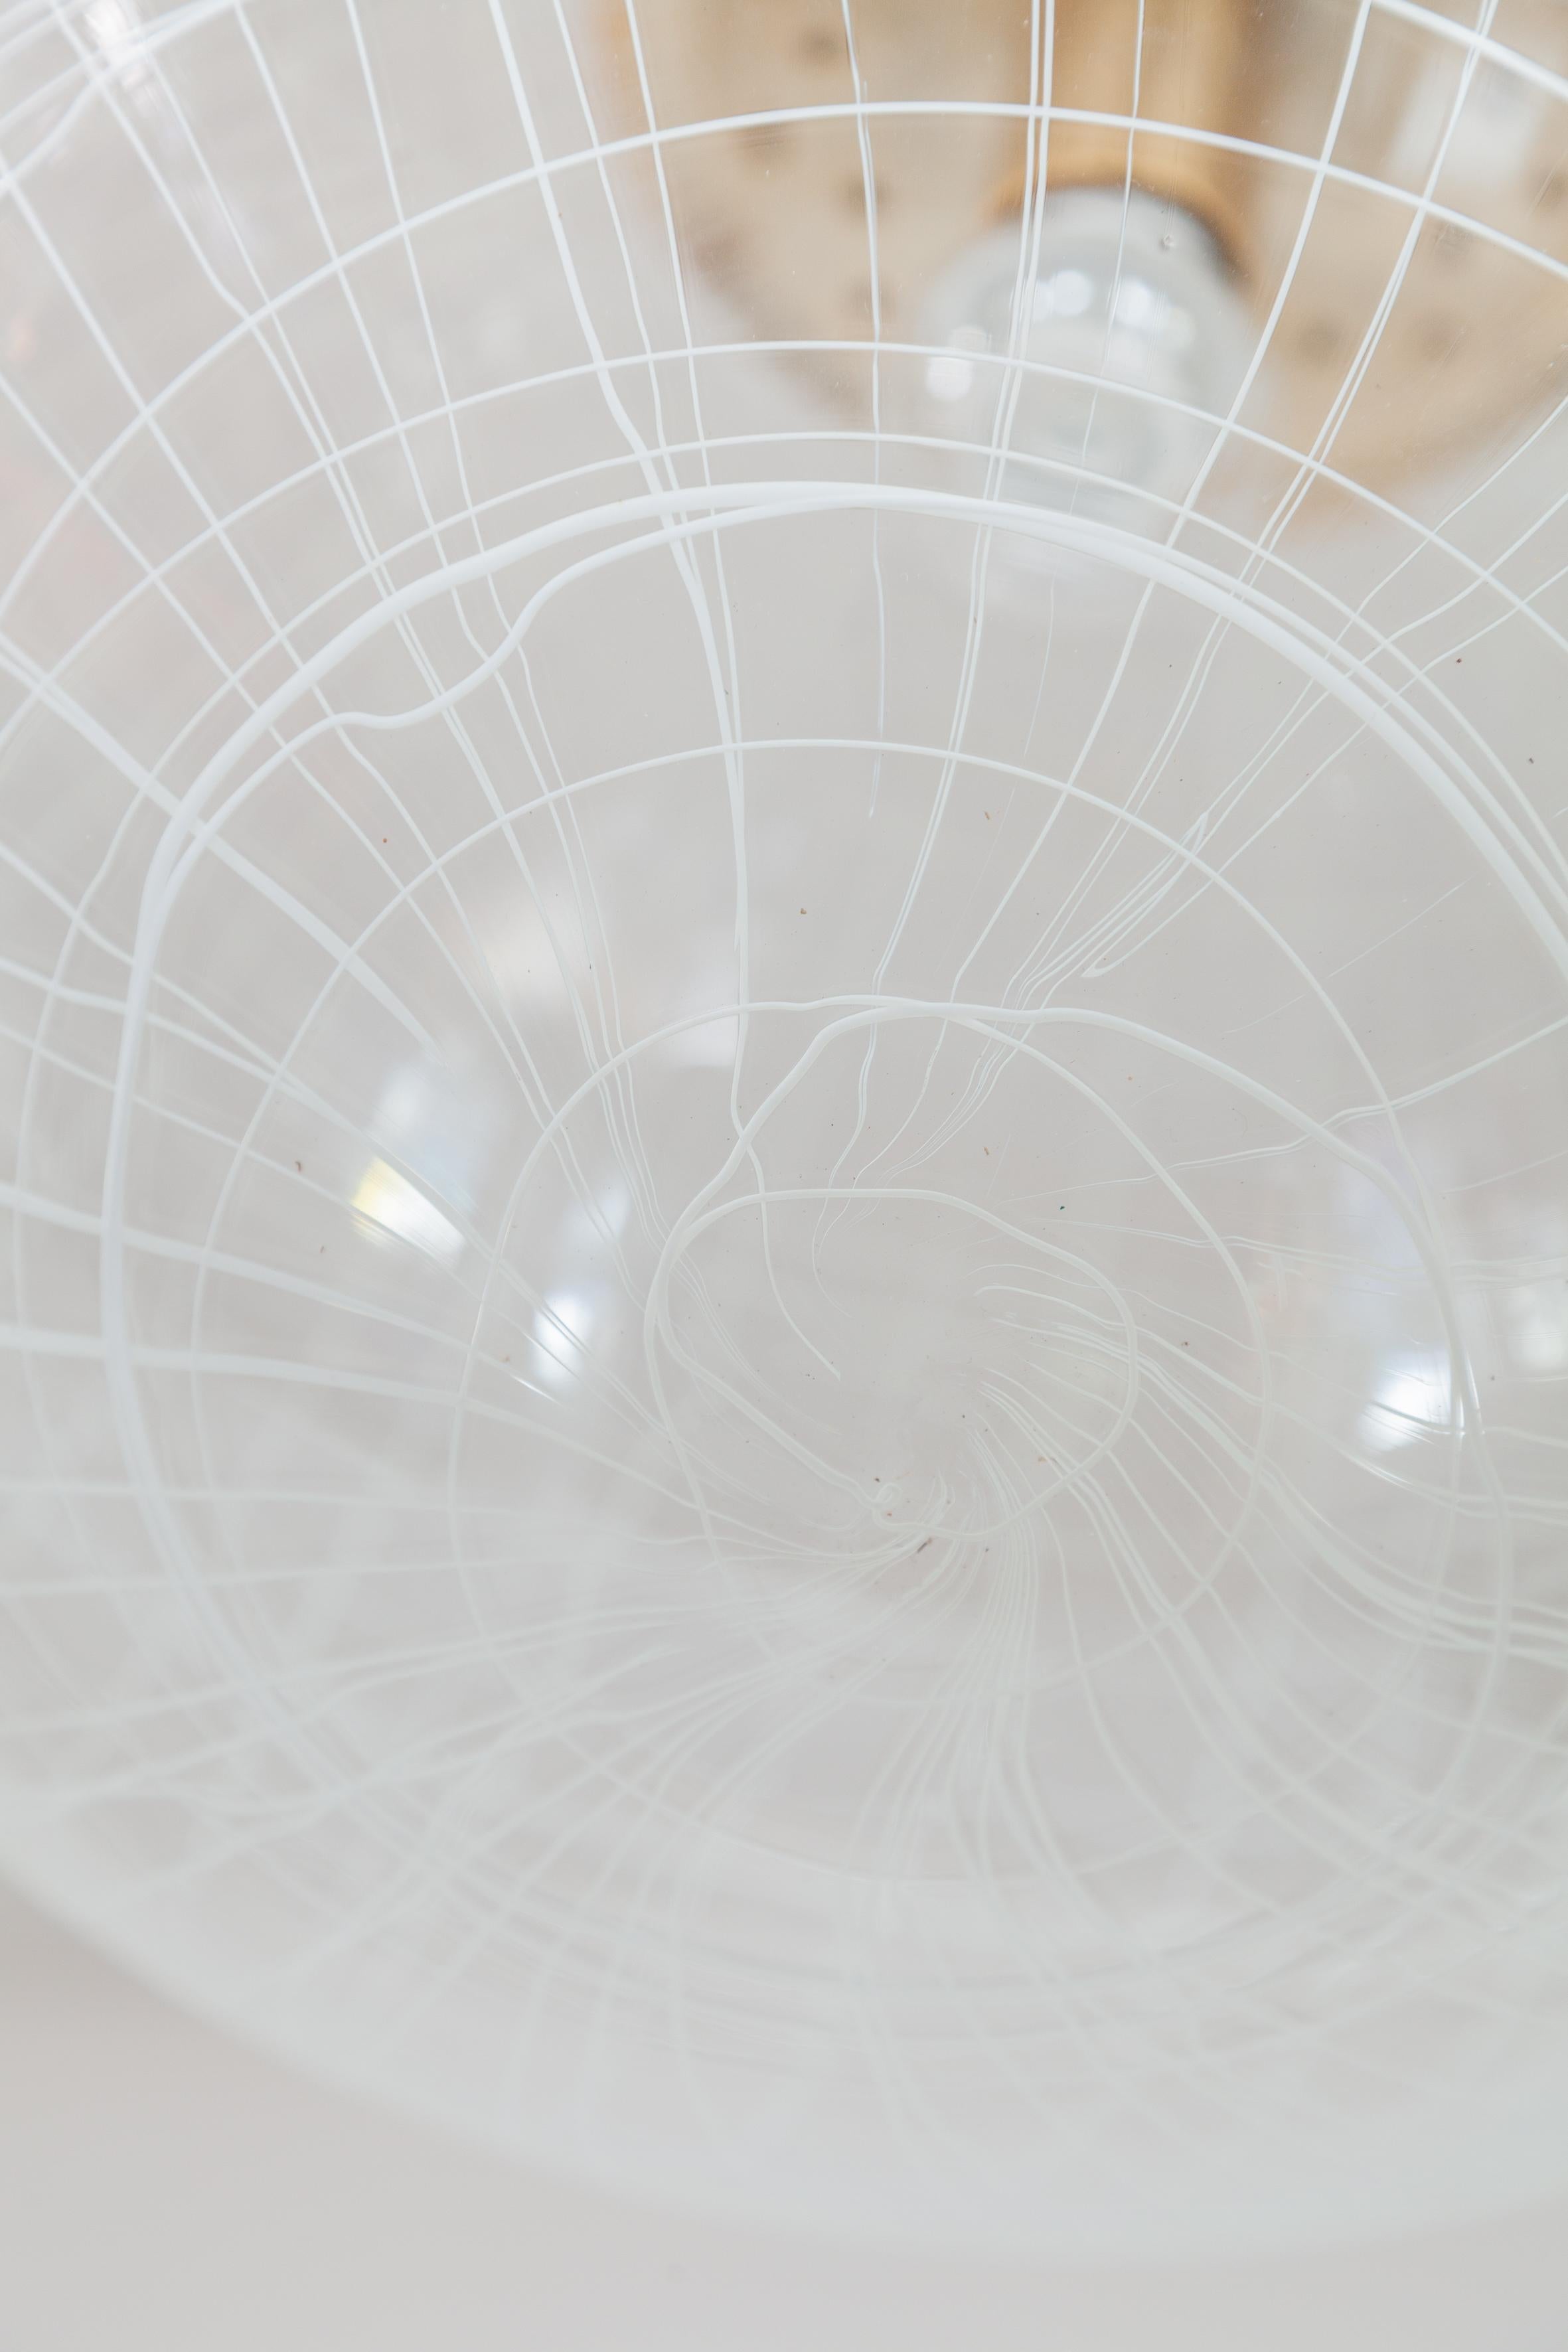 Hand-Crafted La Murrina Clear Bowl Glass with Spaghetti Swirl Pendant Lamp, Italy, 1970s For Sale